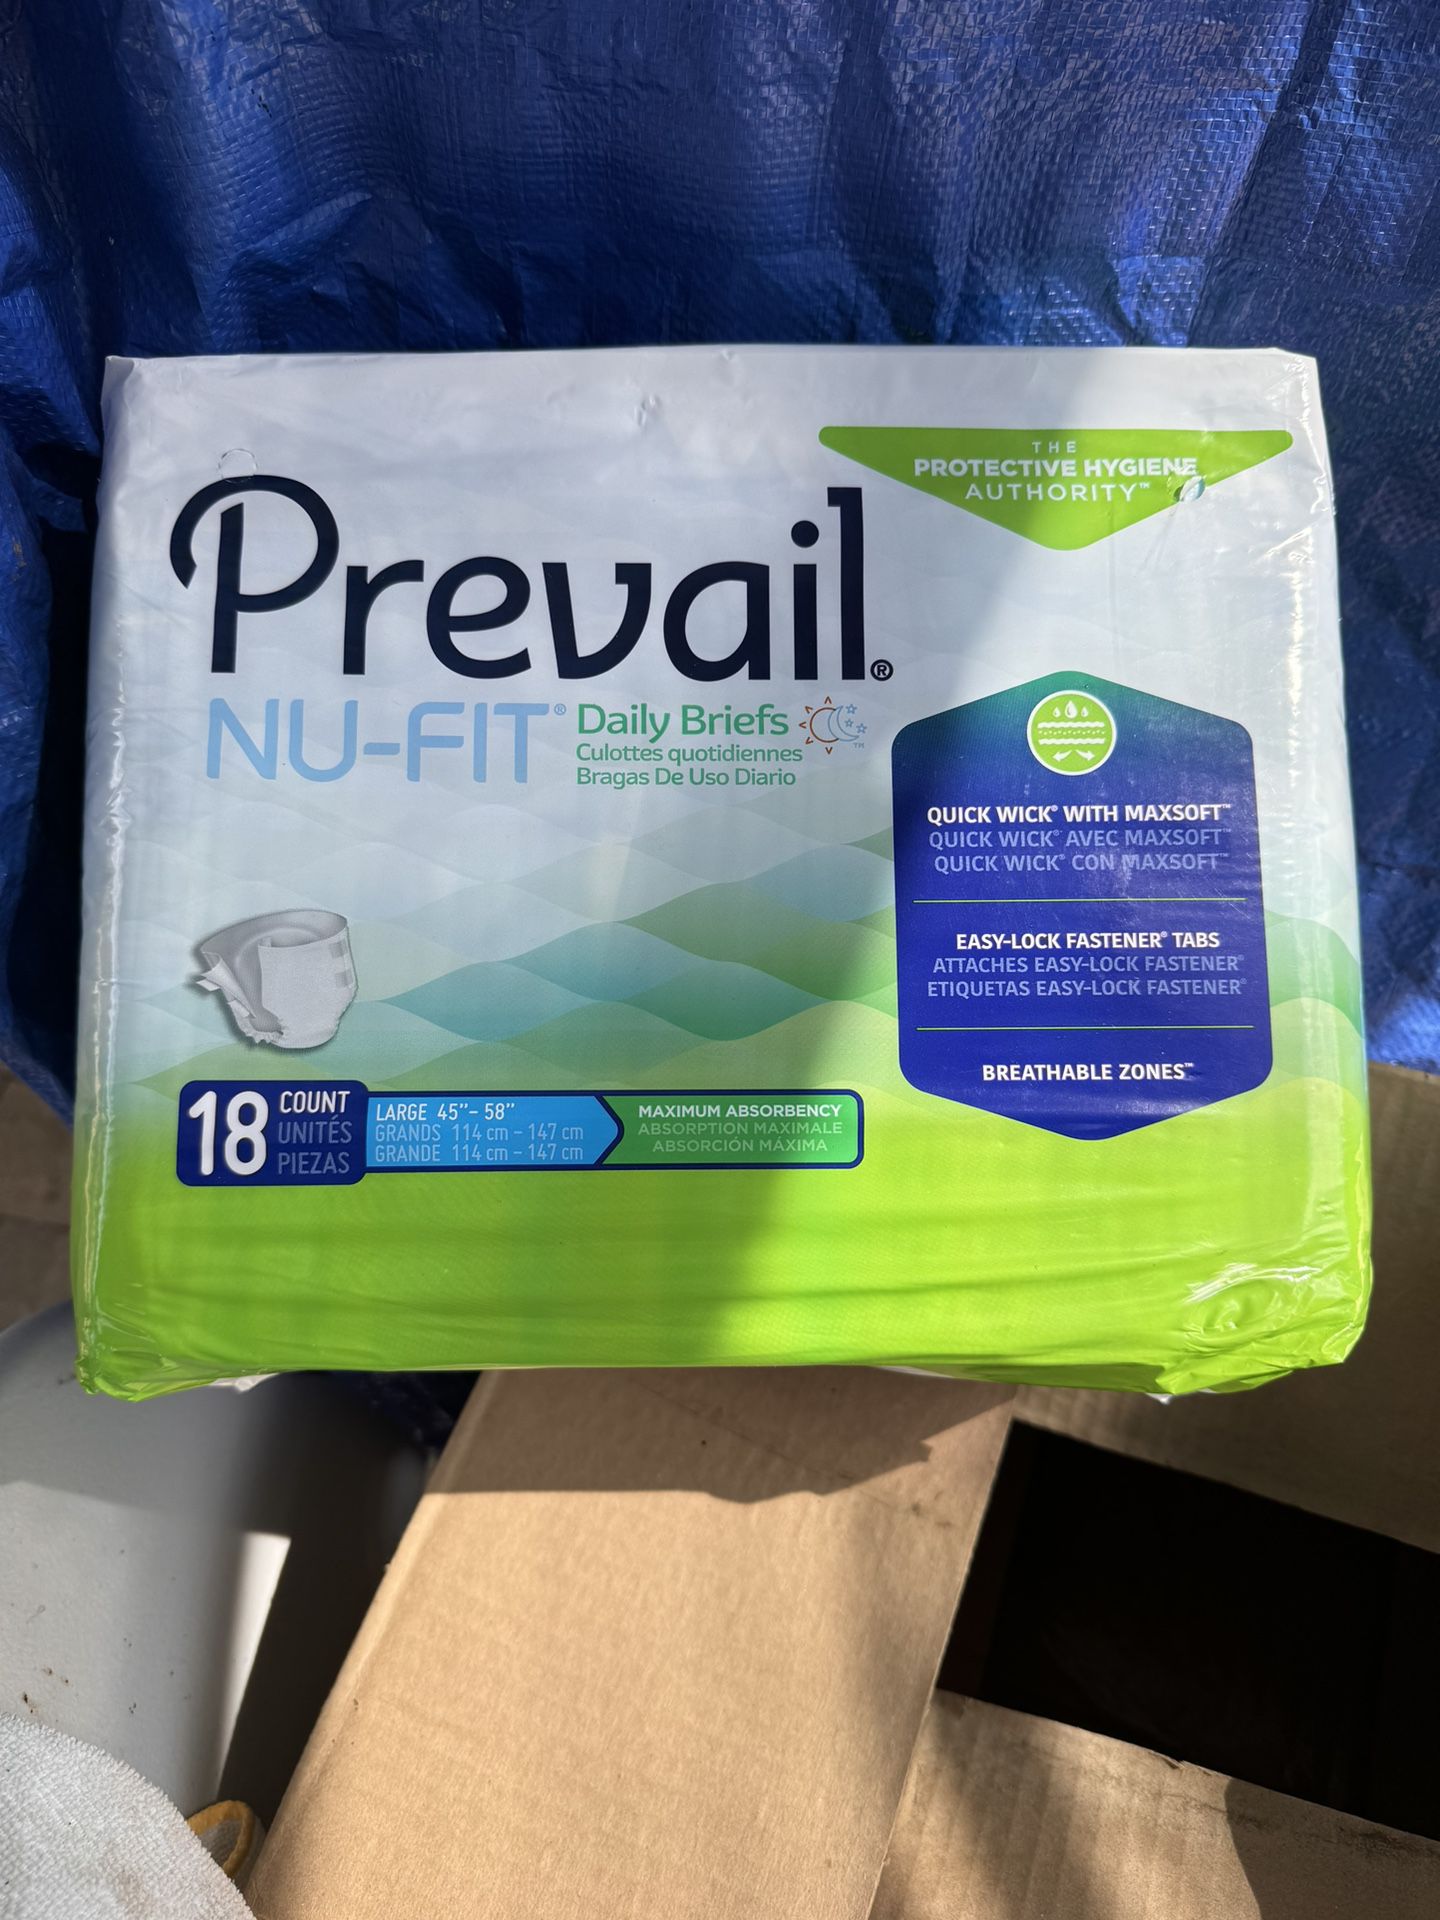 NEW ADULT DIAPERS 